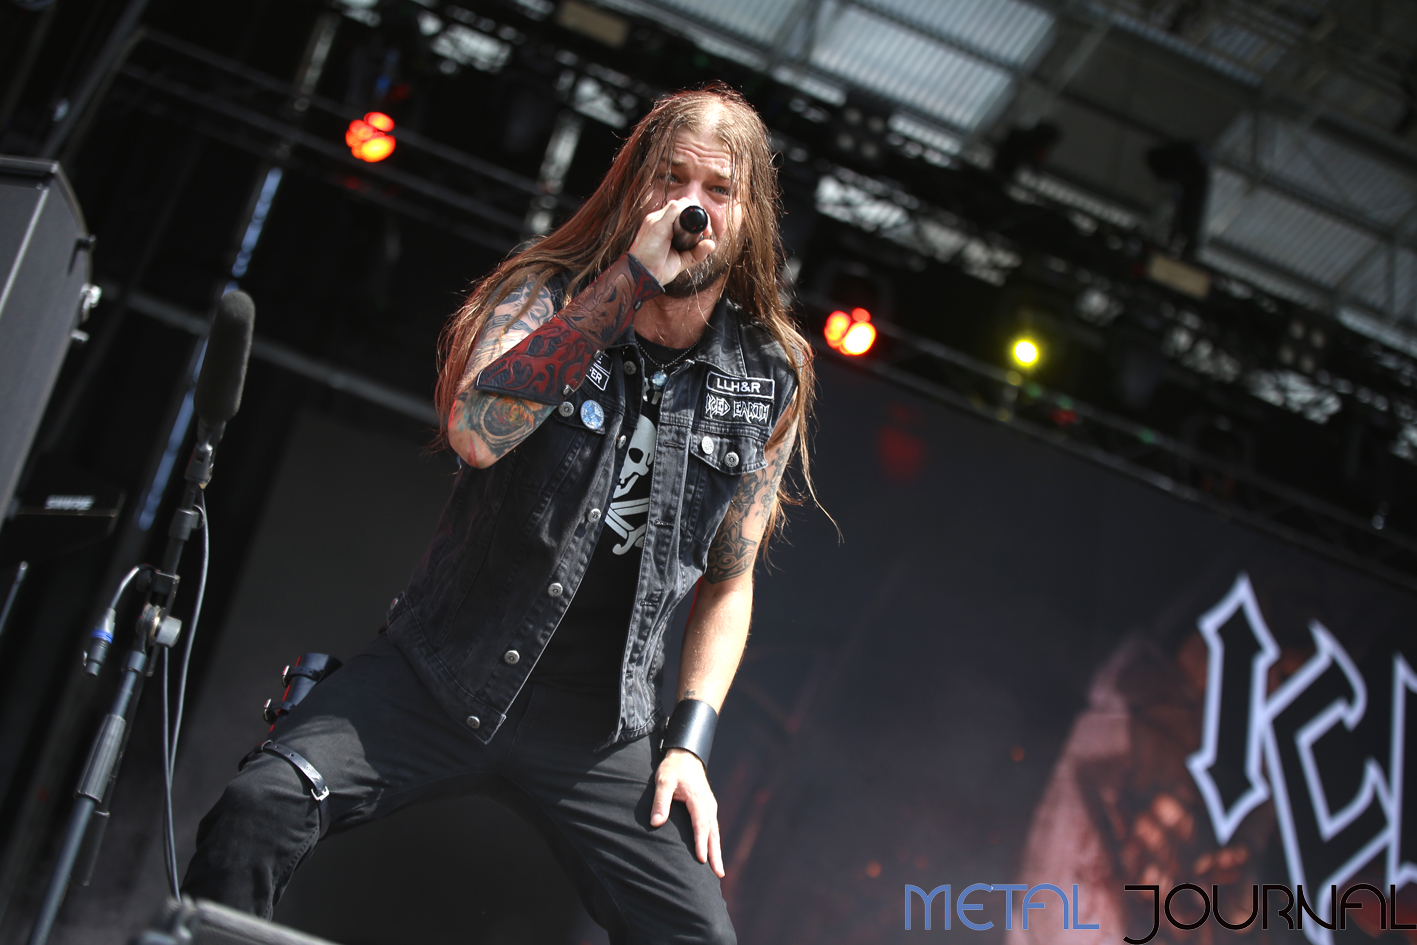 iced earth rock fest 18 - metal journal pic 5